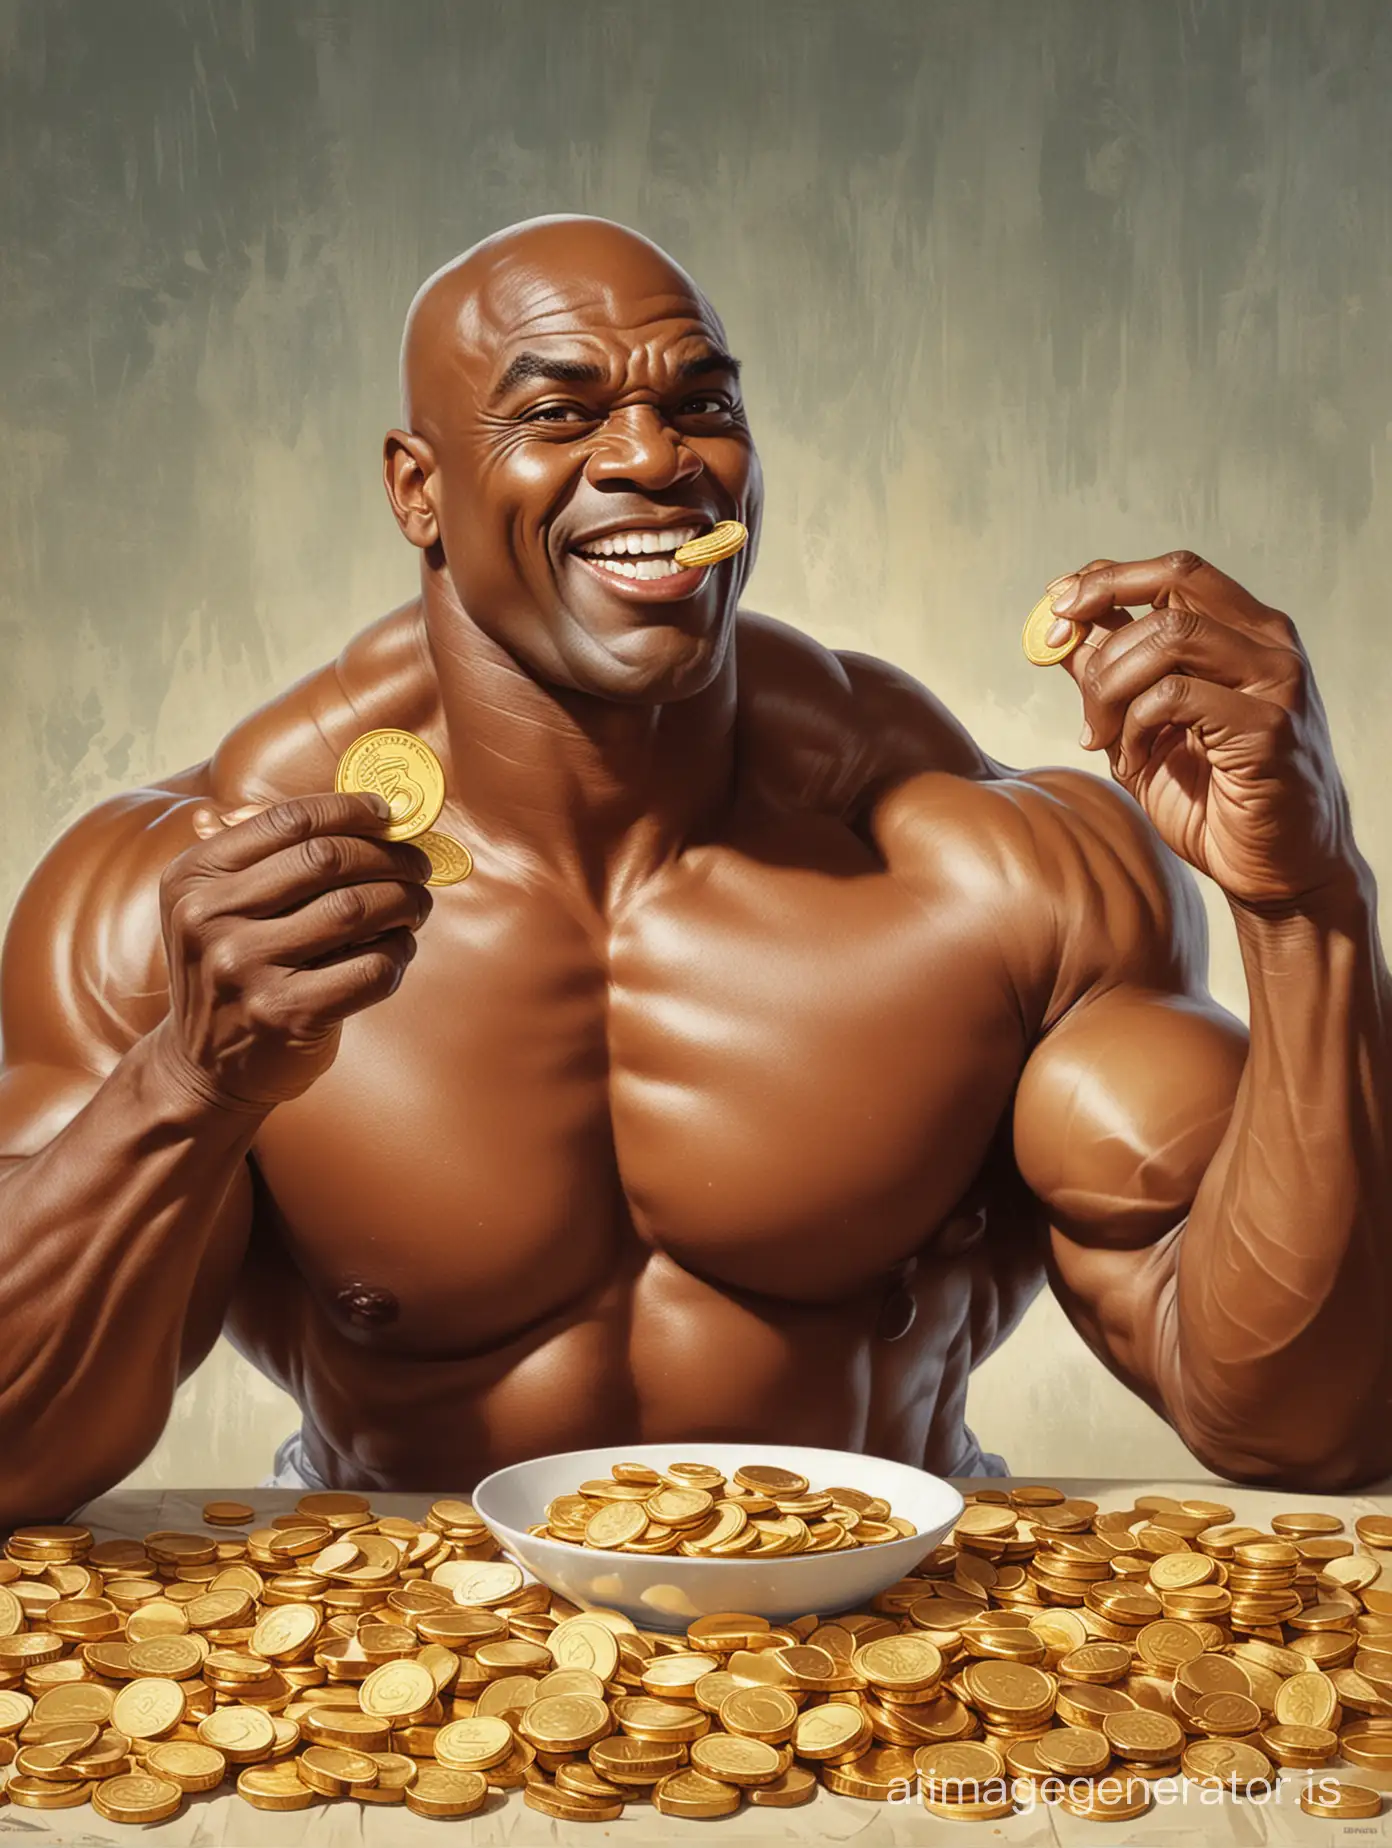 vintage communist propaganda poster
illustration of Ronnie Coleman eating gold coins for breakfast and pointing up